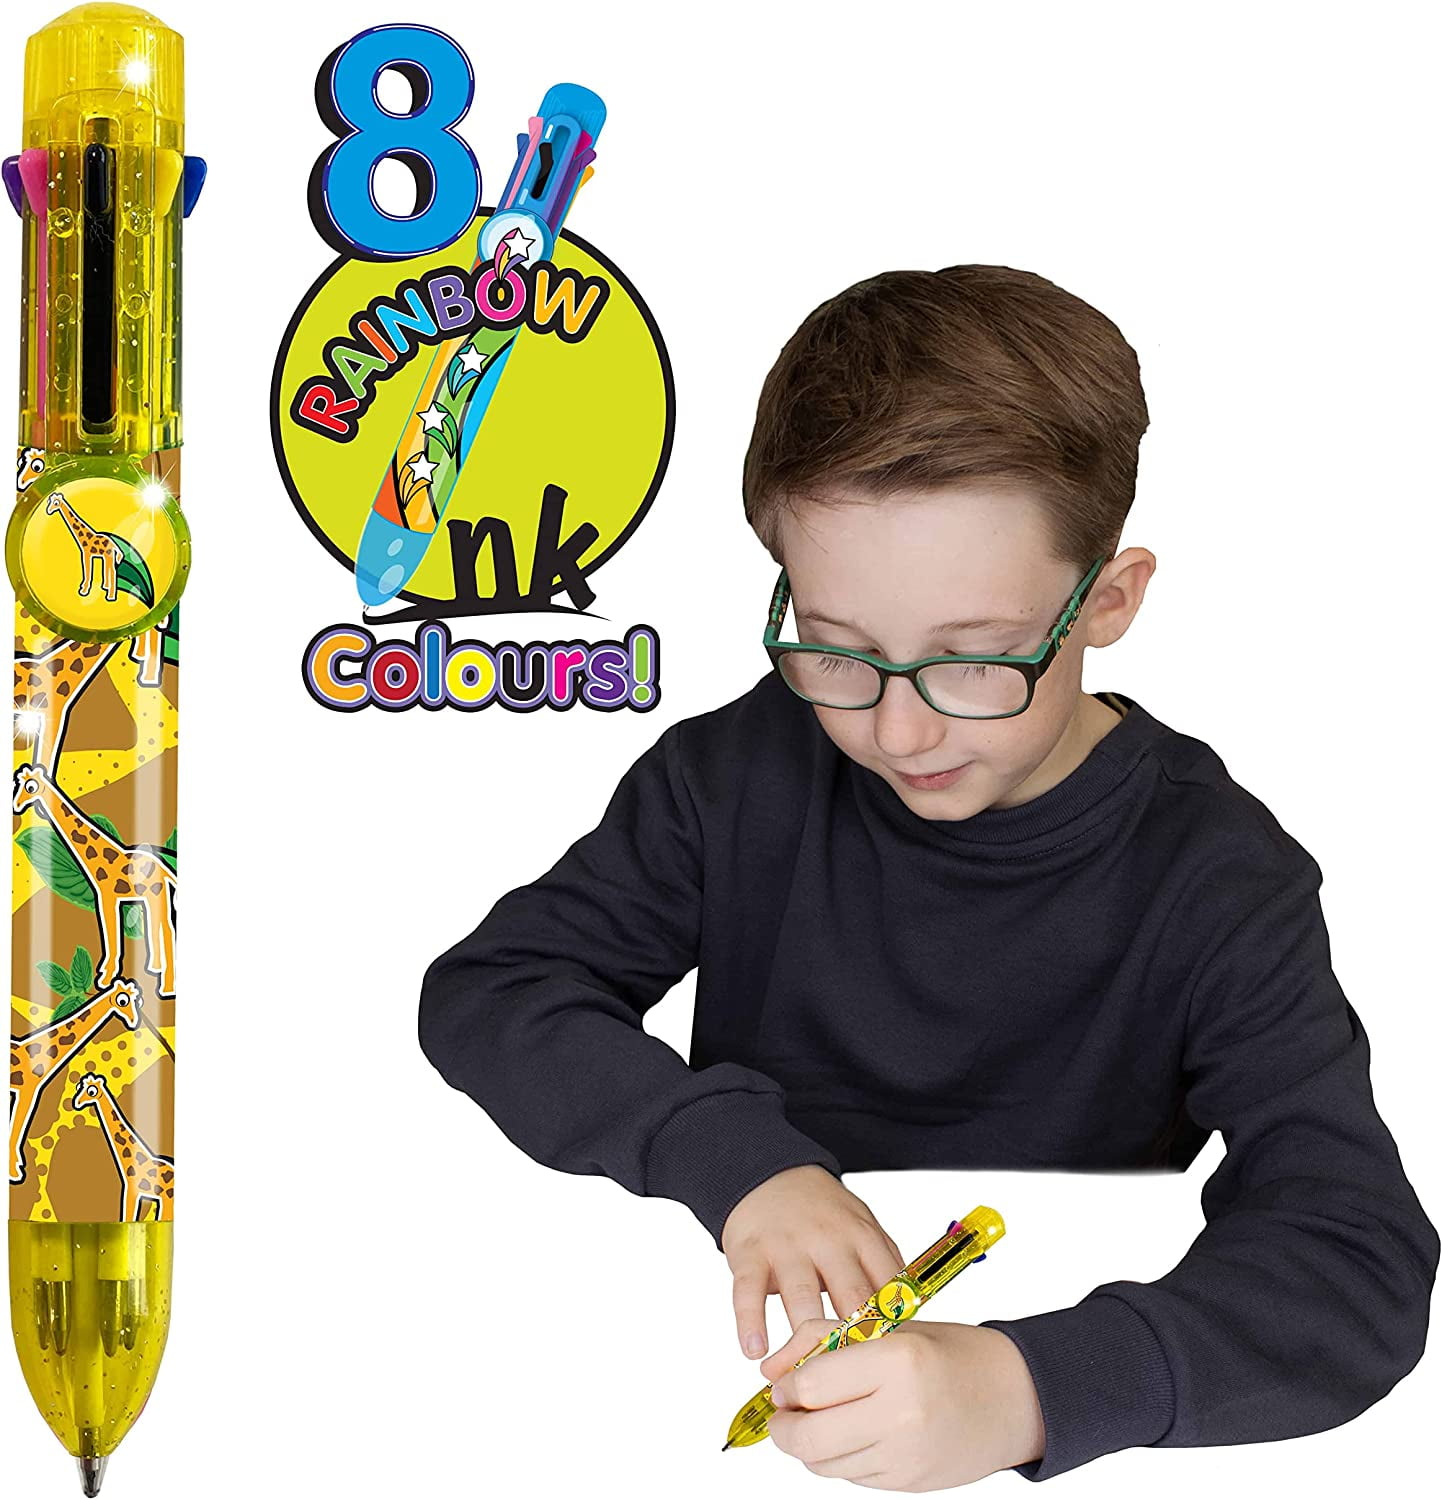 Rainbow Writer - Giraffe Pen from Deluxebase. 8 in 1 Retractable Ballpoint Pen, Fancy Pens for Kids and Ideal Office or School Supplies, Size: 5.5 x